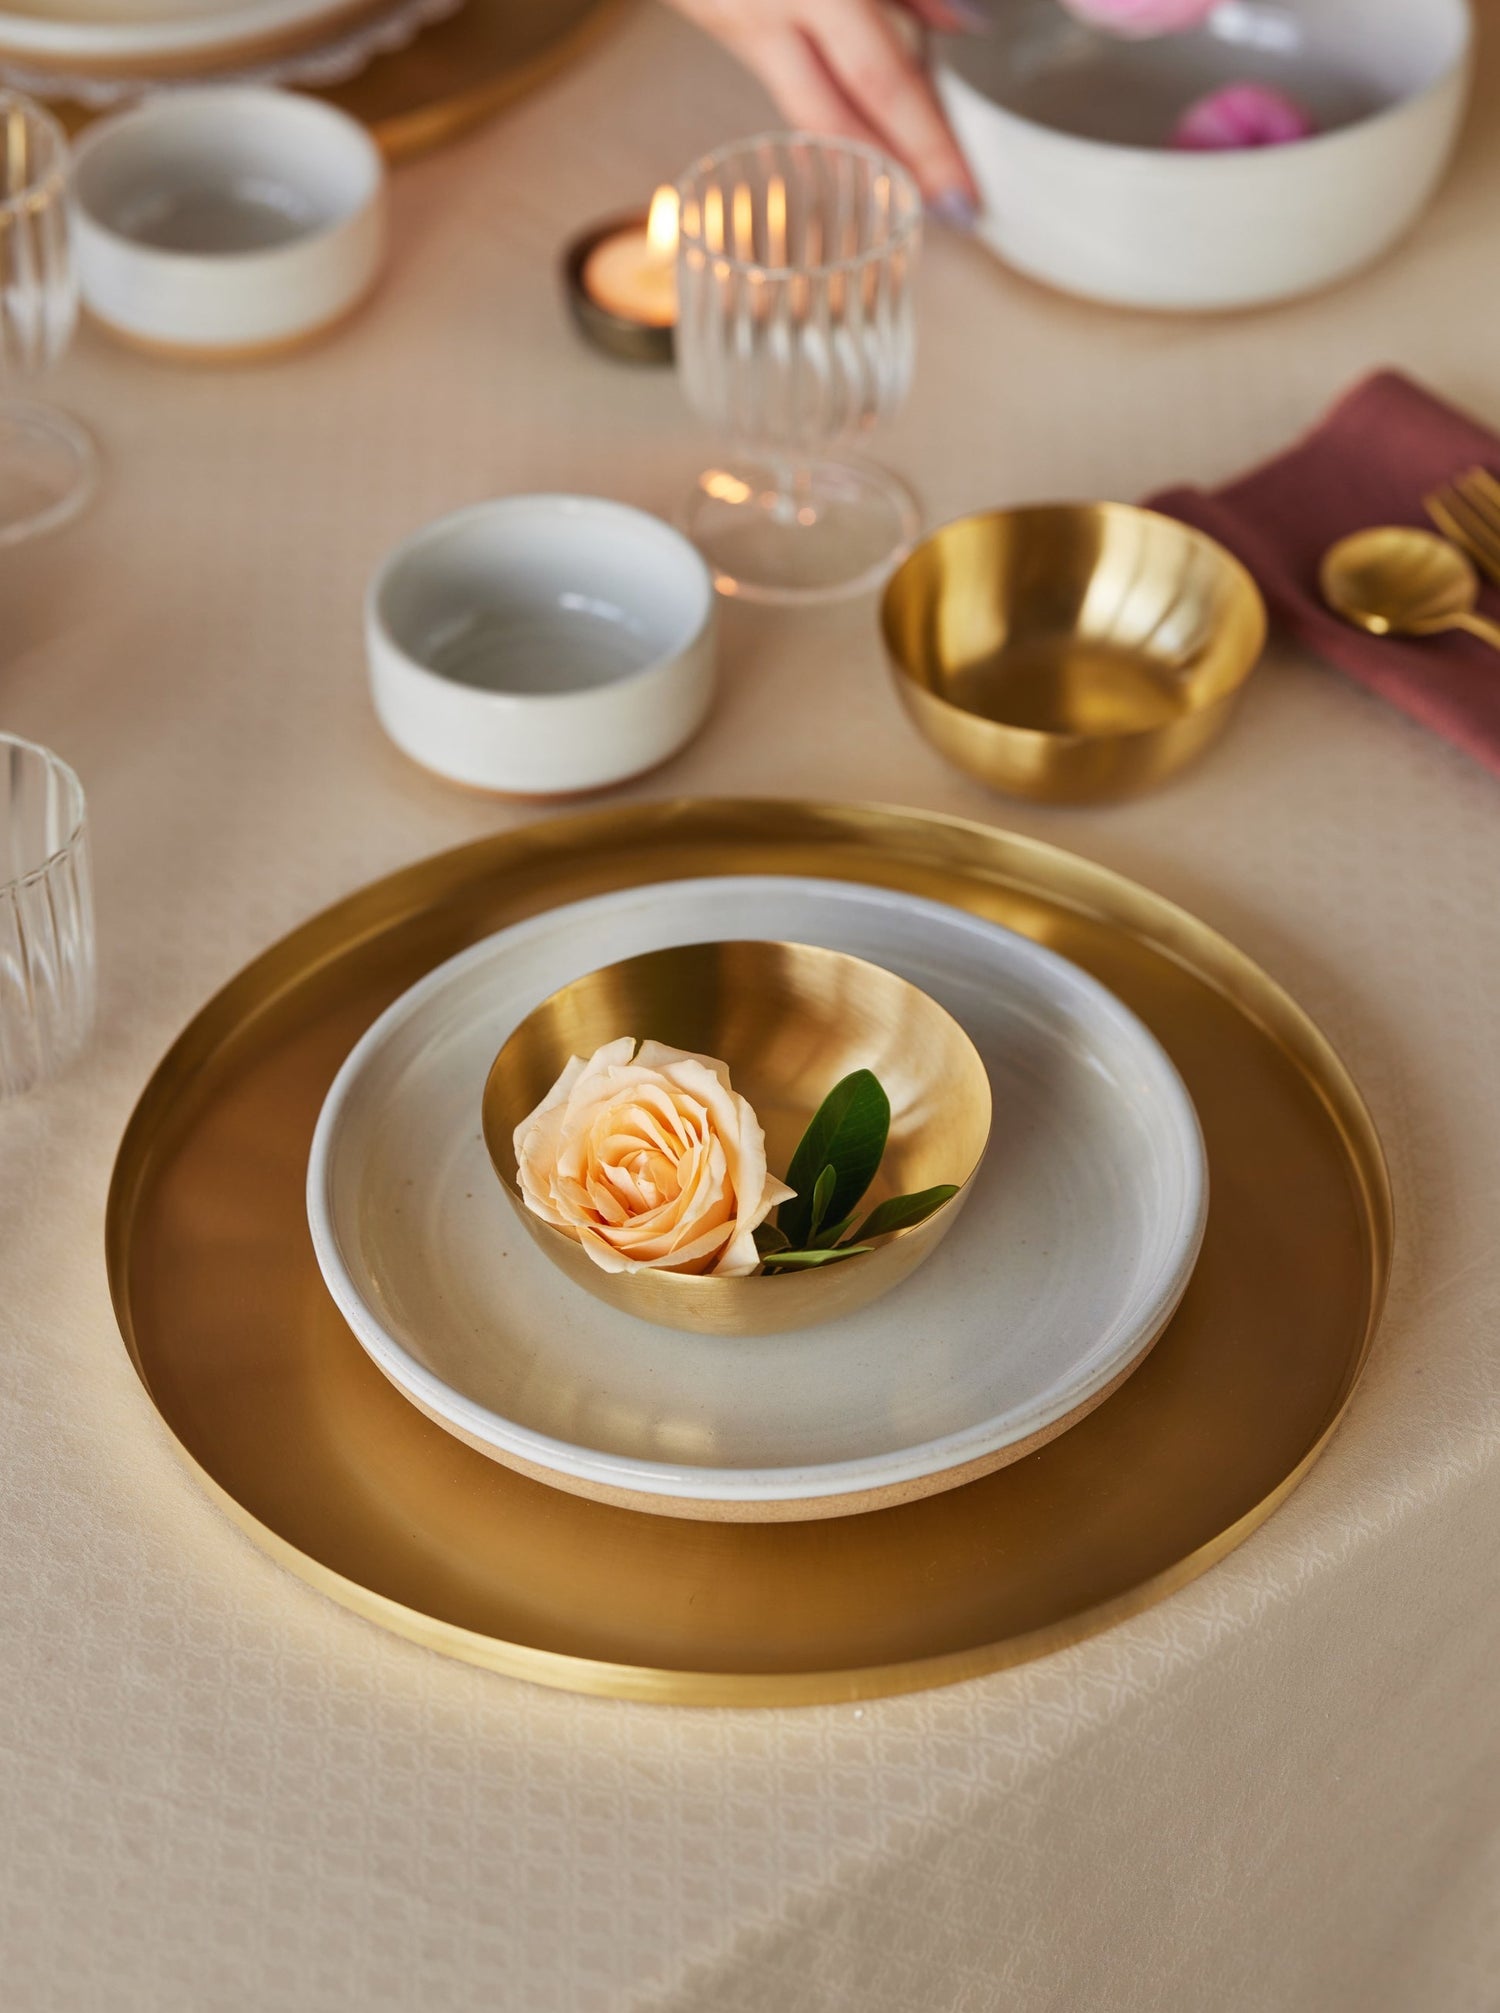 Snowdrop side plate with heirloom brass plate and a peach rose